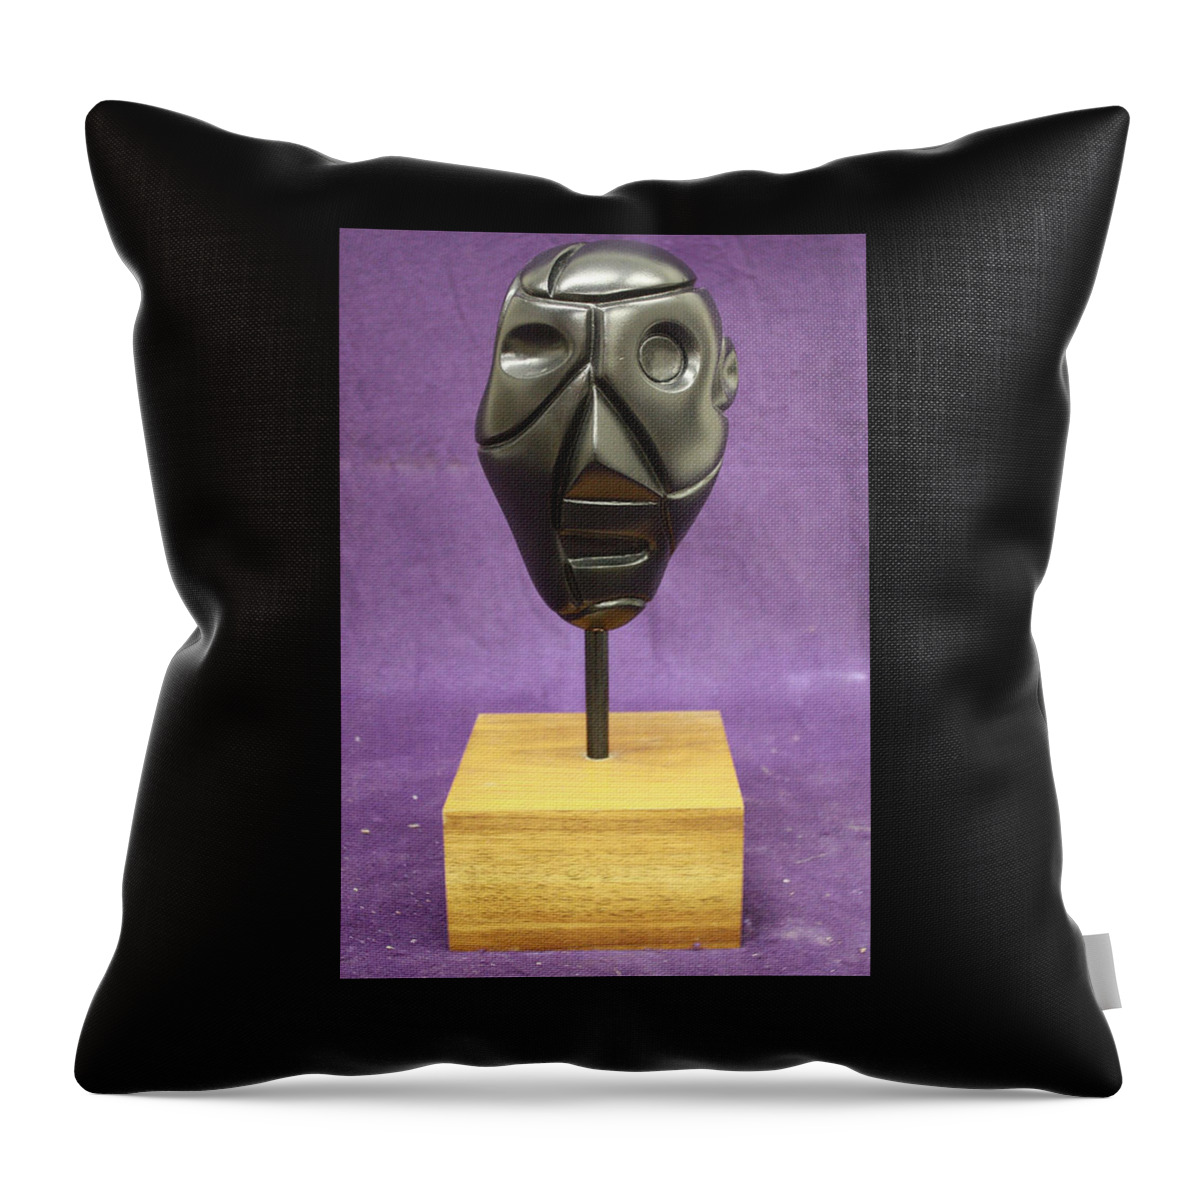 Abstract Throw Pillow featuring the sculpture Abstract Head by Christopher Denham